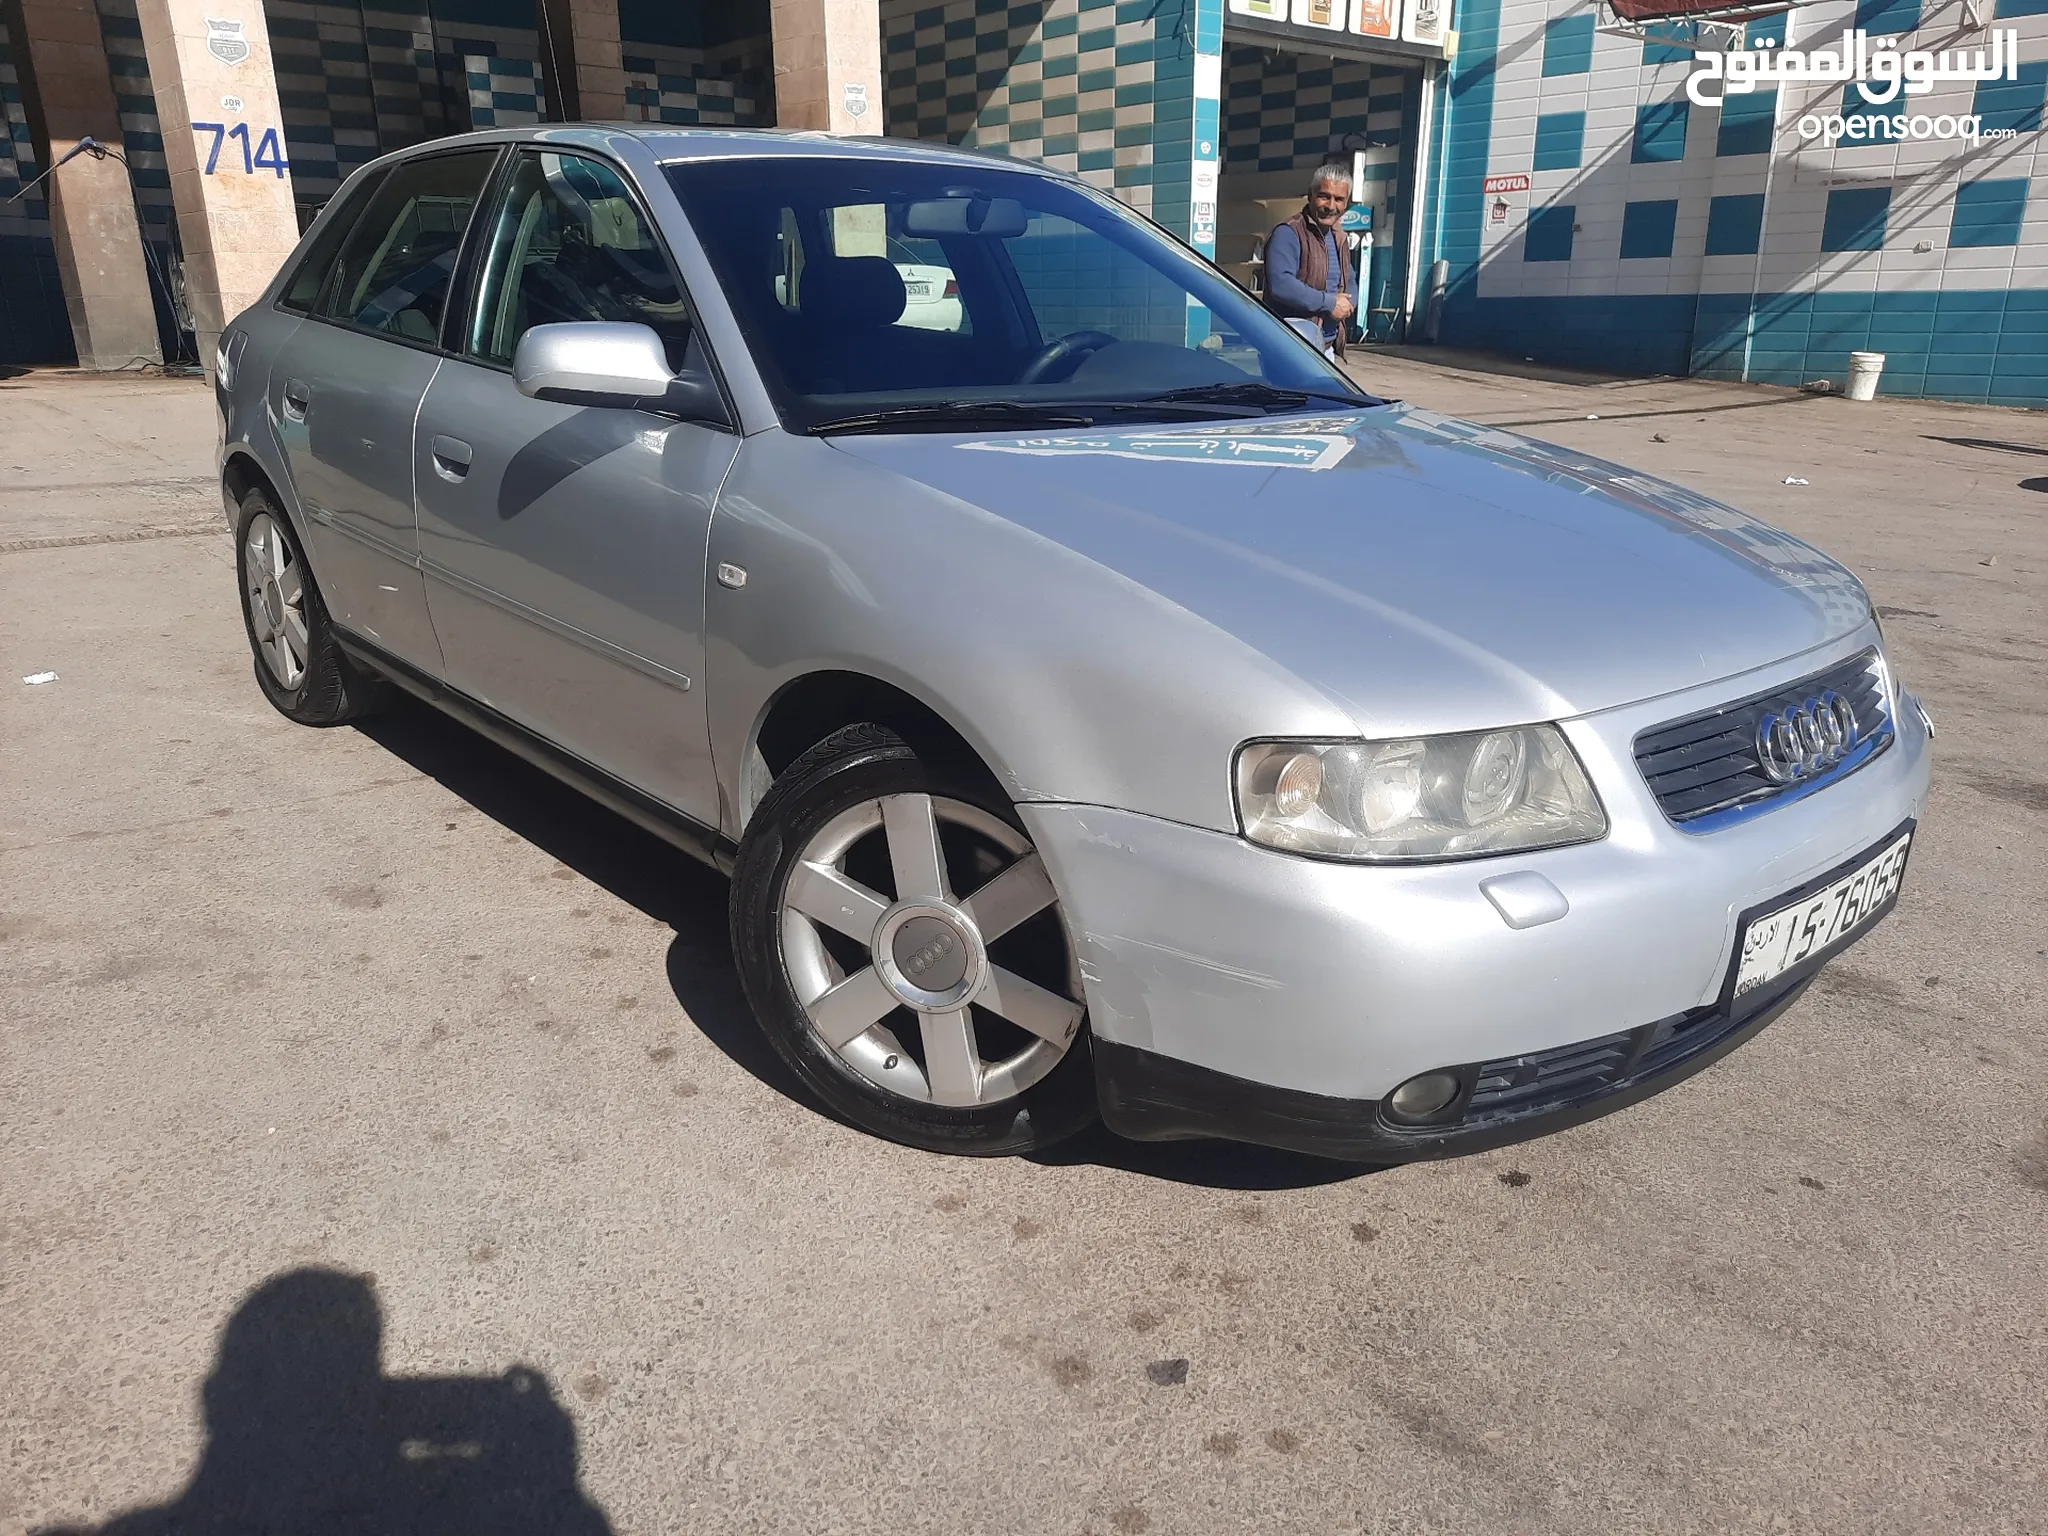 Audi A3 Cars for Sale in Jordan : Best Prices : All A3 Models : New & Used  | OpenSooq